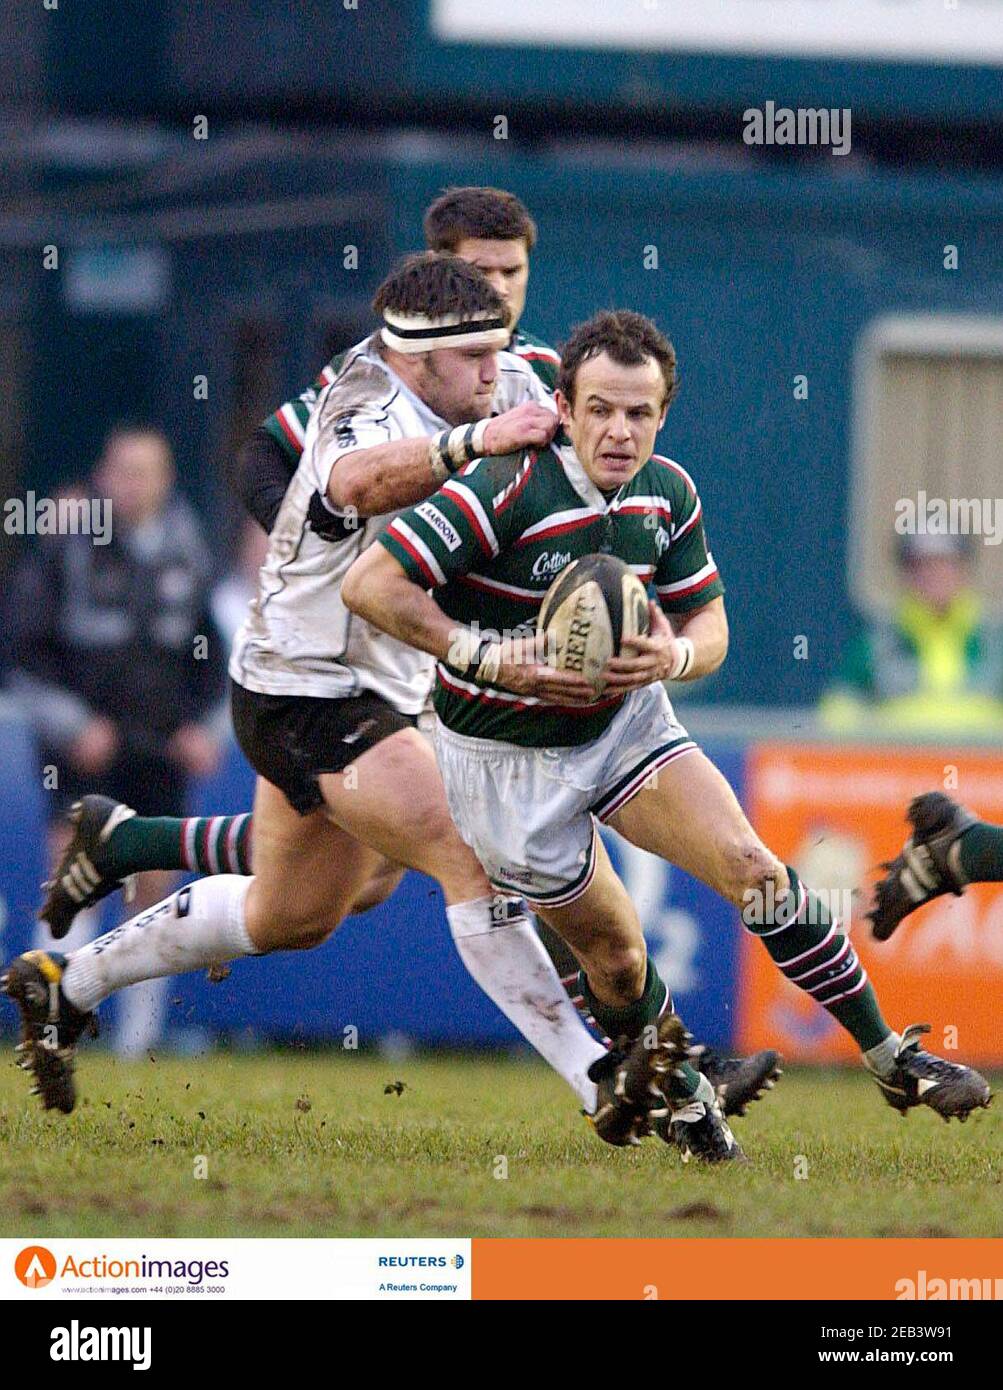 Rugby Union - Leicester Tigers v Saracens Guinness Premiership - Welford  Road - 2/1/06 Leicester's Austin Healey is held by Saracens' Ben Broster  Mandatory Credit: Action Images / Stuart Crump Livepic Stock Photo - Alamy